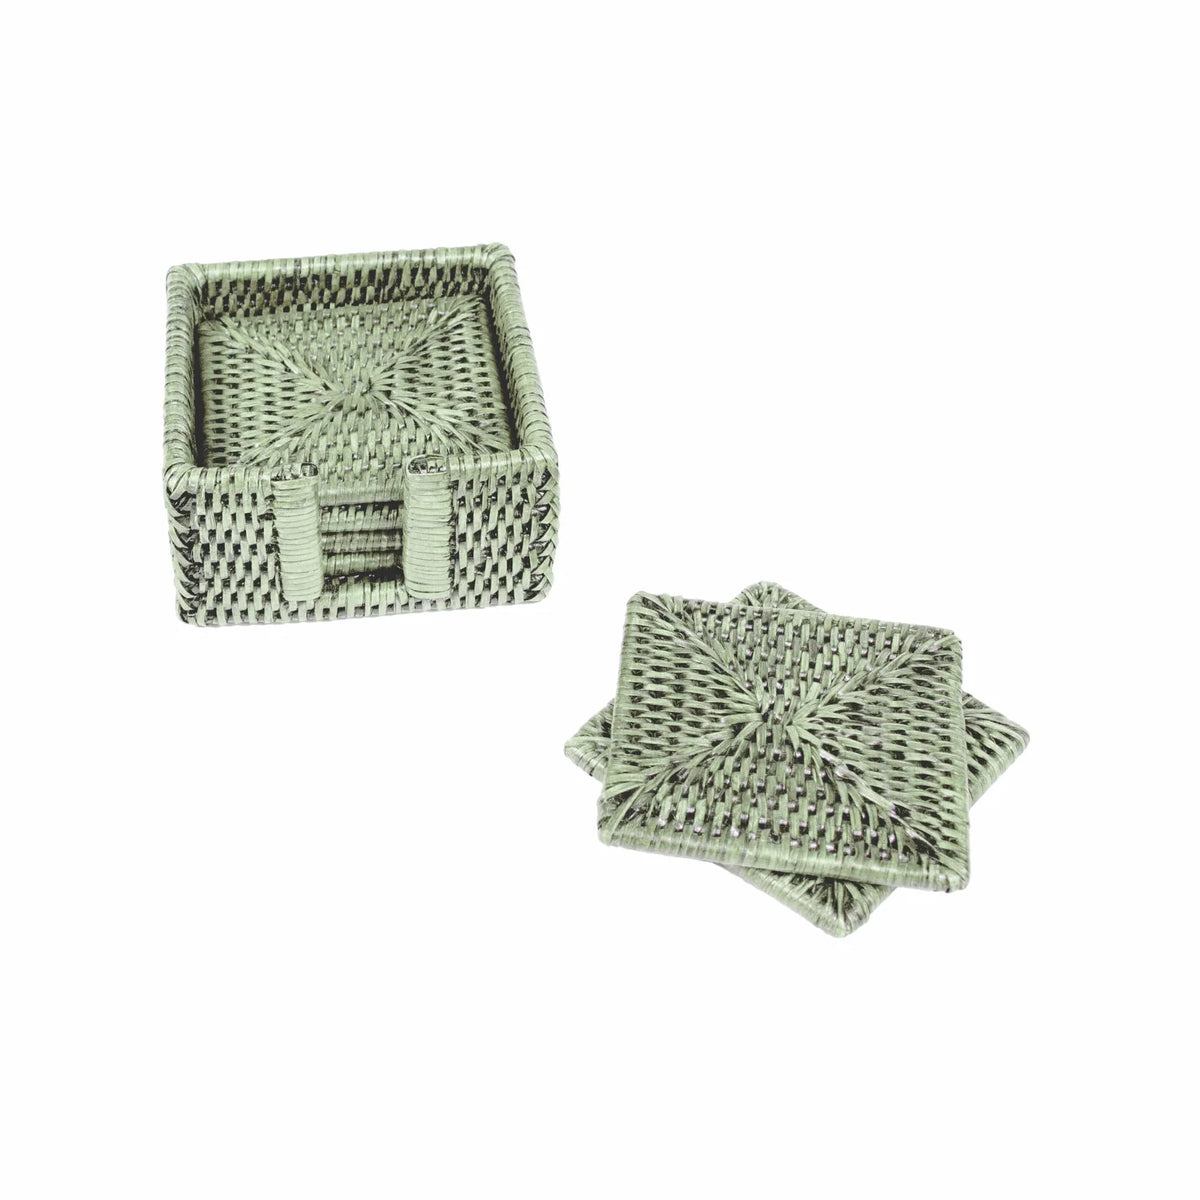 Rattan Square Coaster and Holder Set in Green